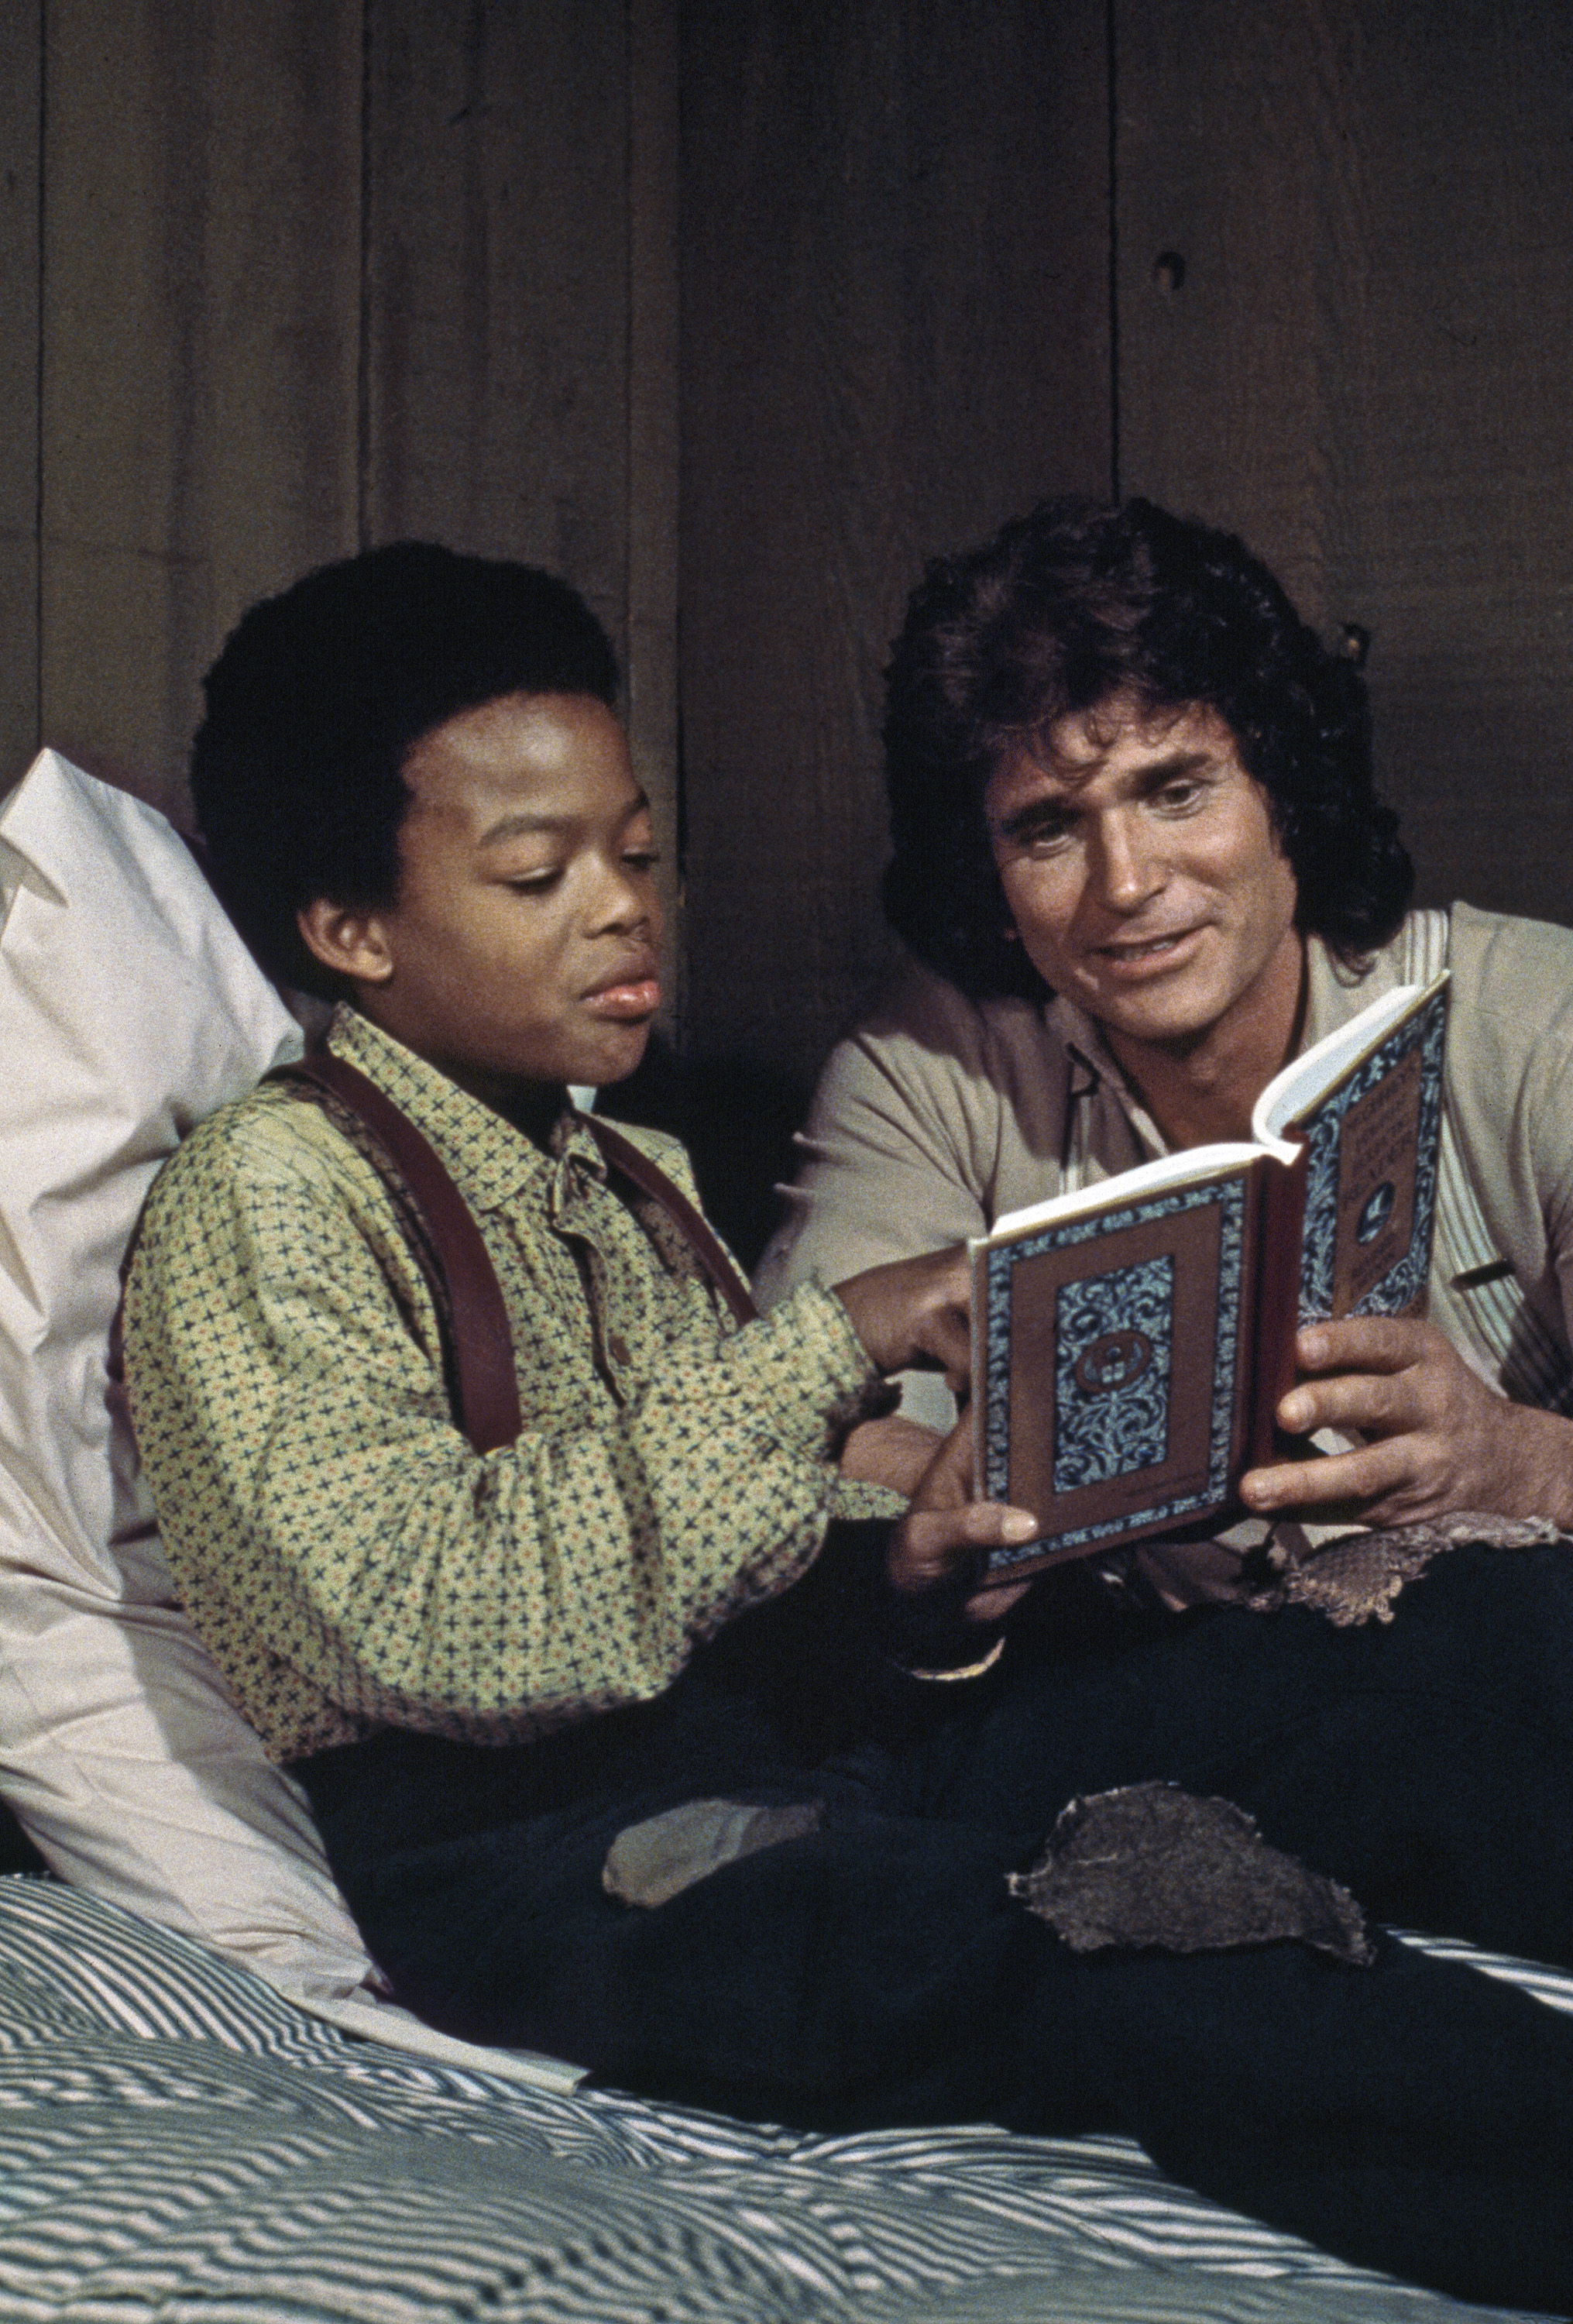 Michael Landon as Charles Ingalls reads a book to Todd Bridges as Solomon in an episode of Little House on the Prairie